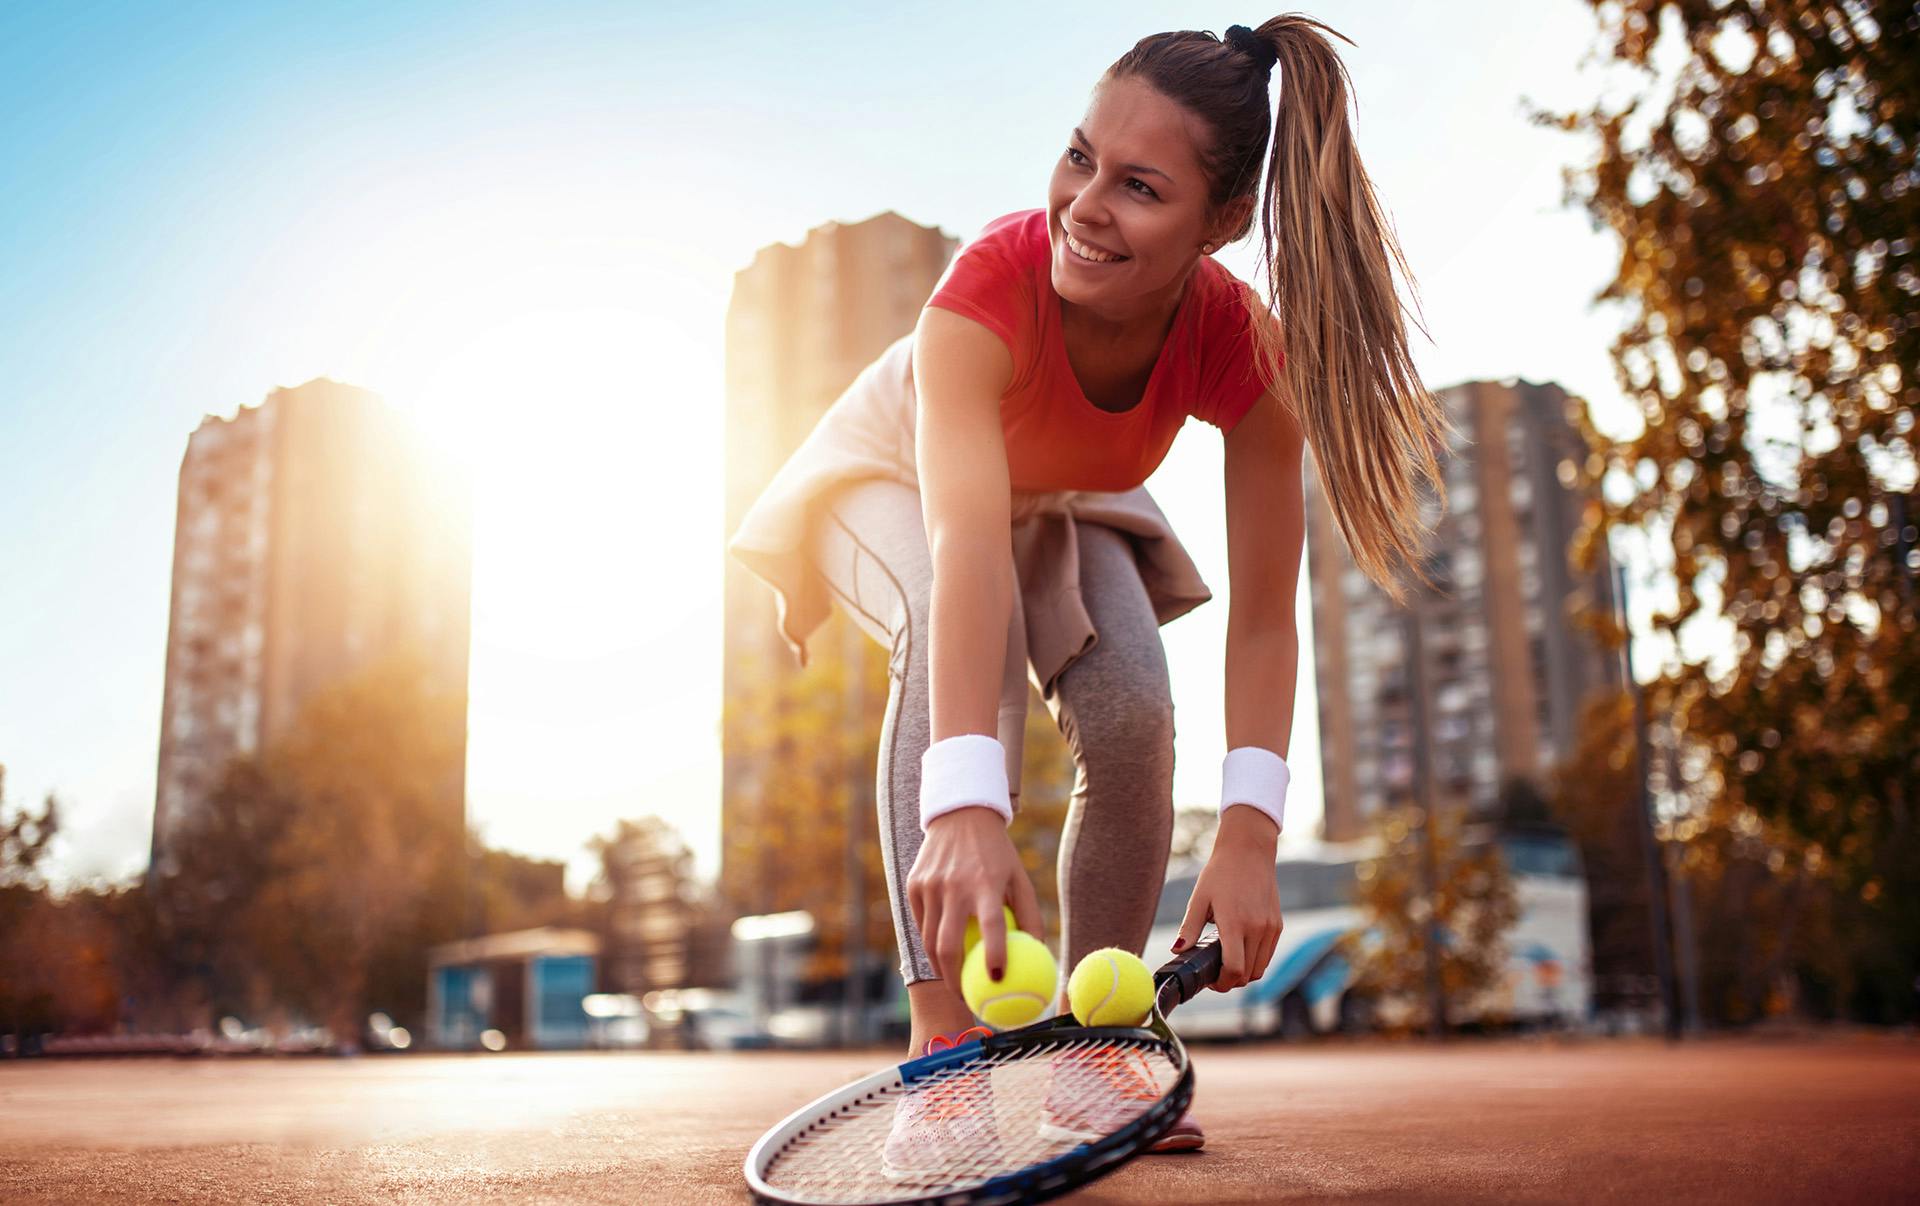 Woman playing tennis with city sunset background.